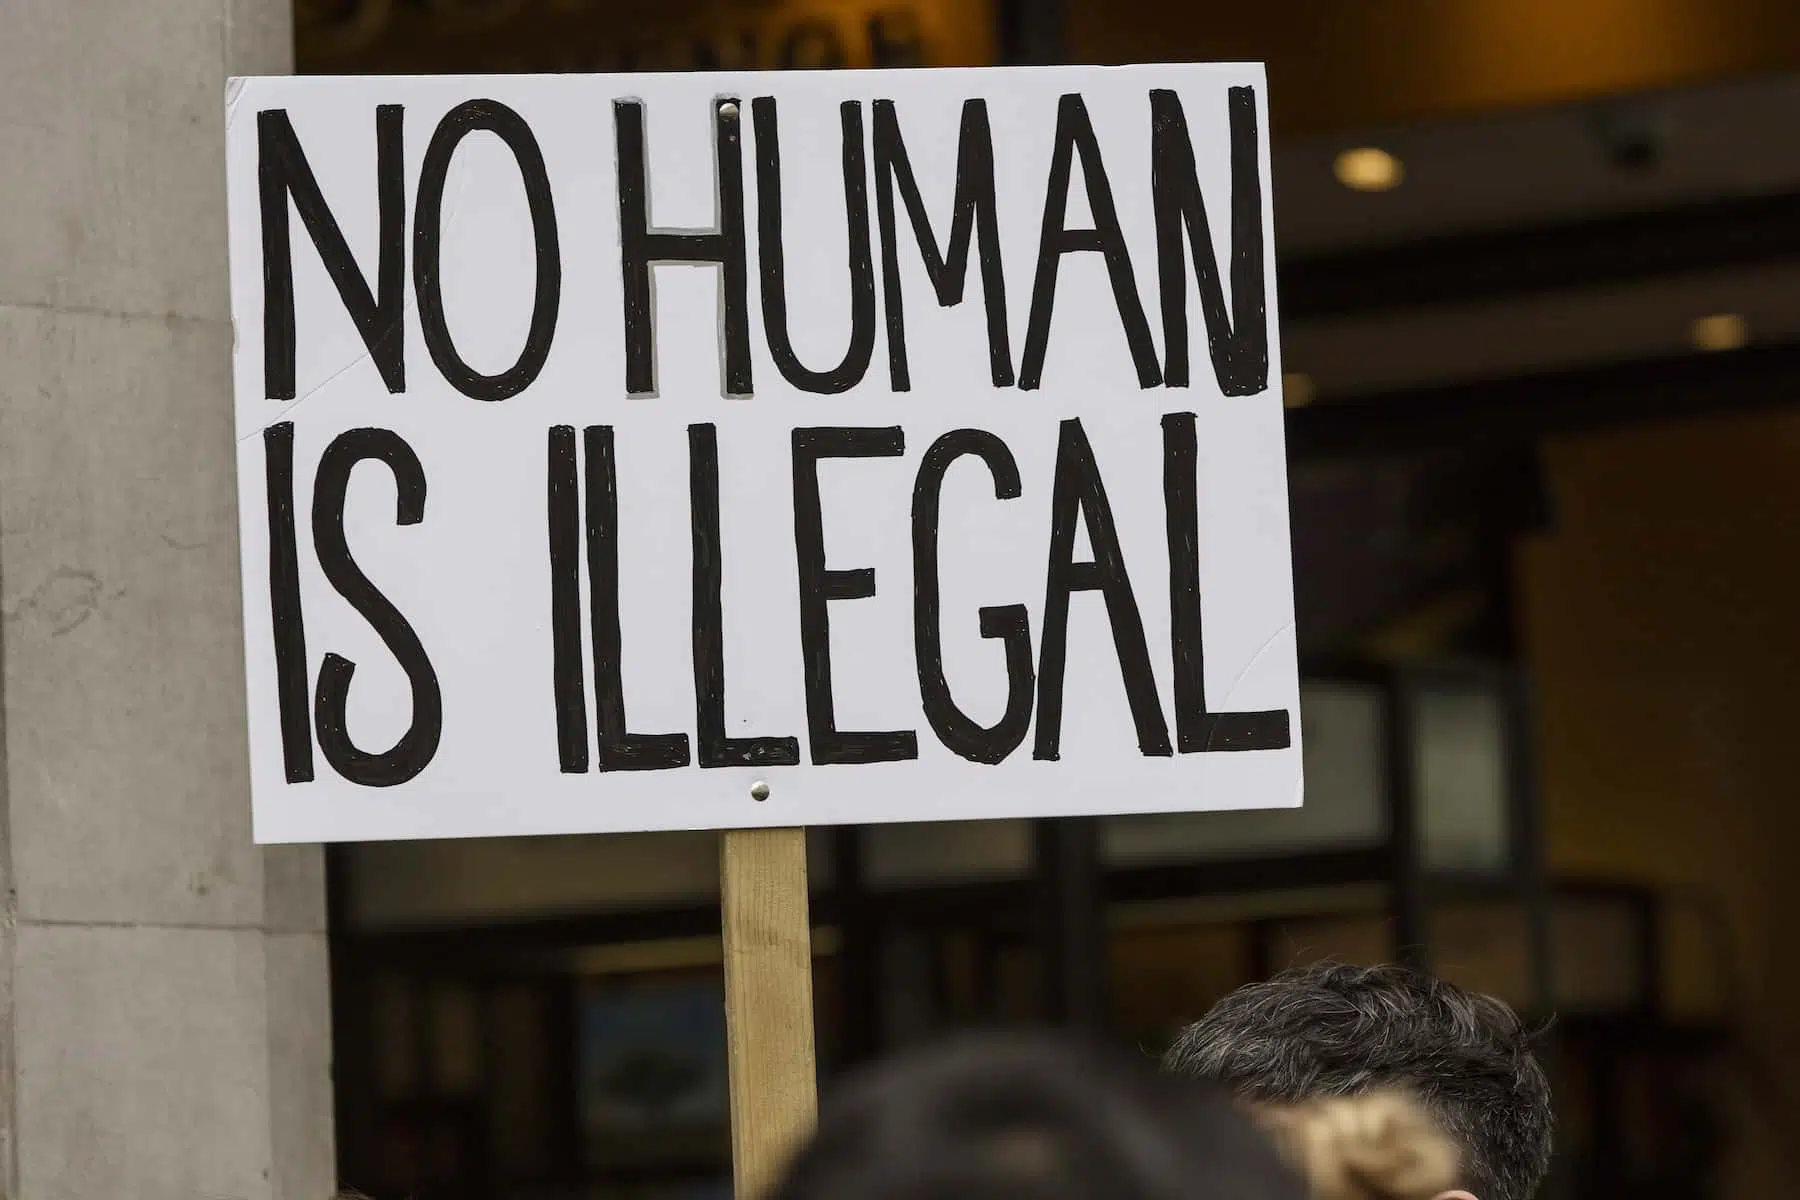 Image of a protest sign that reads "No human is illegal" in reference to California officially becoming a sanctuary state.